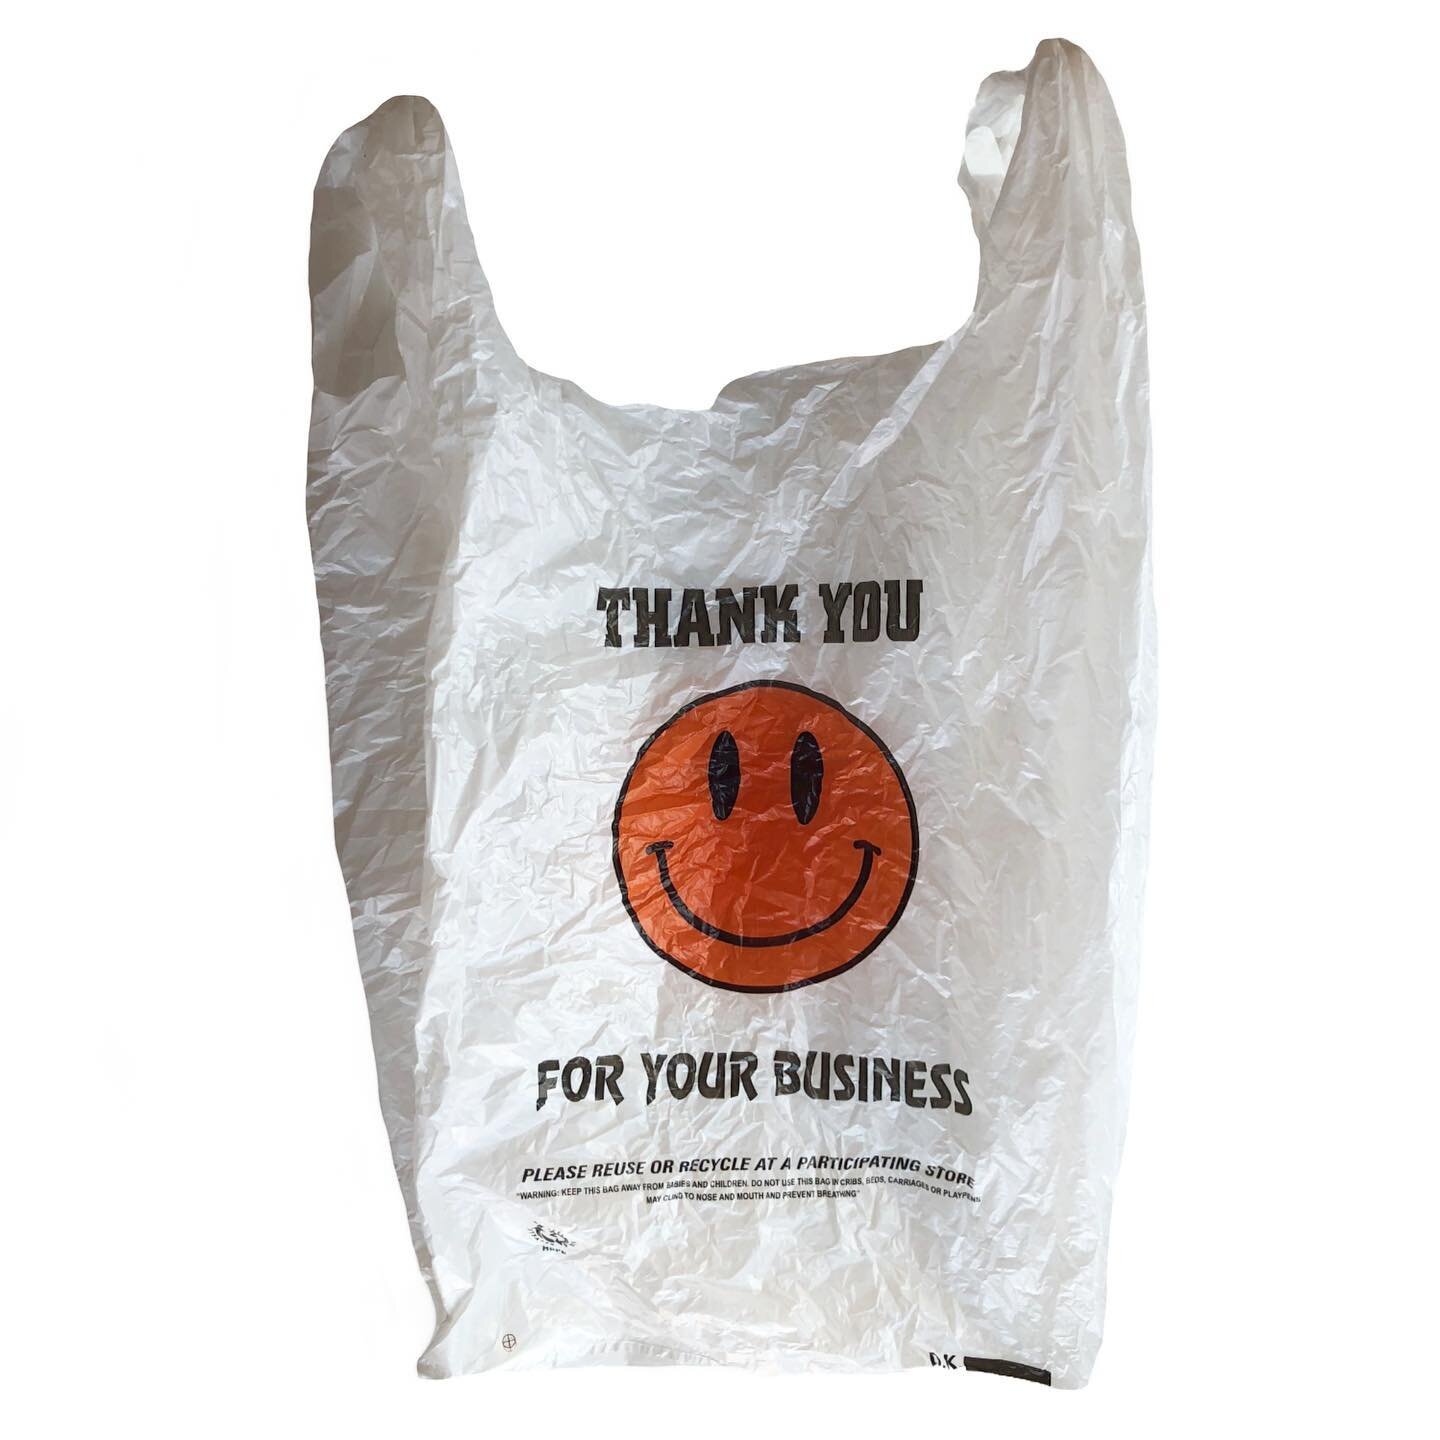 The bag with the orange smilie